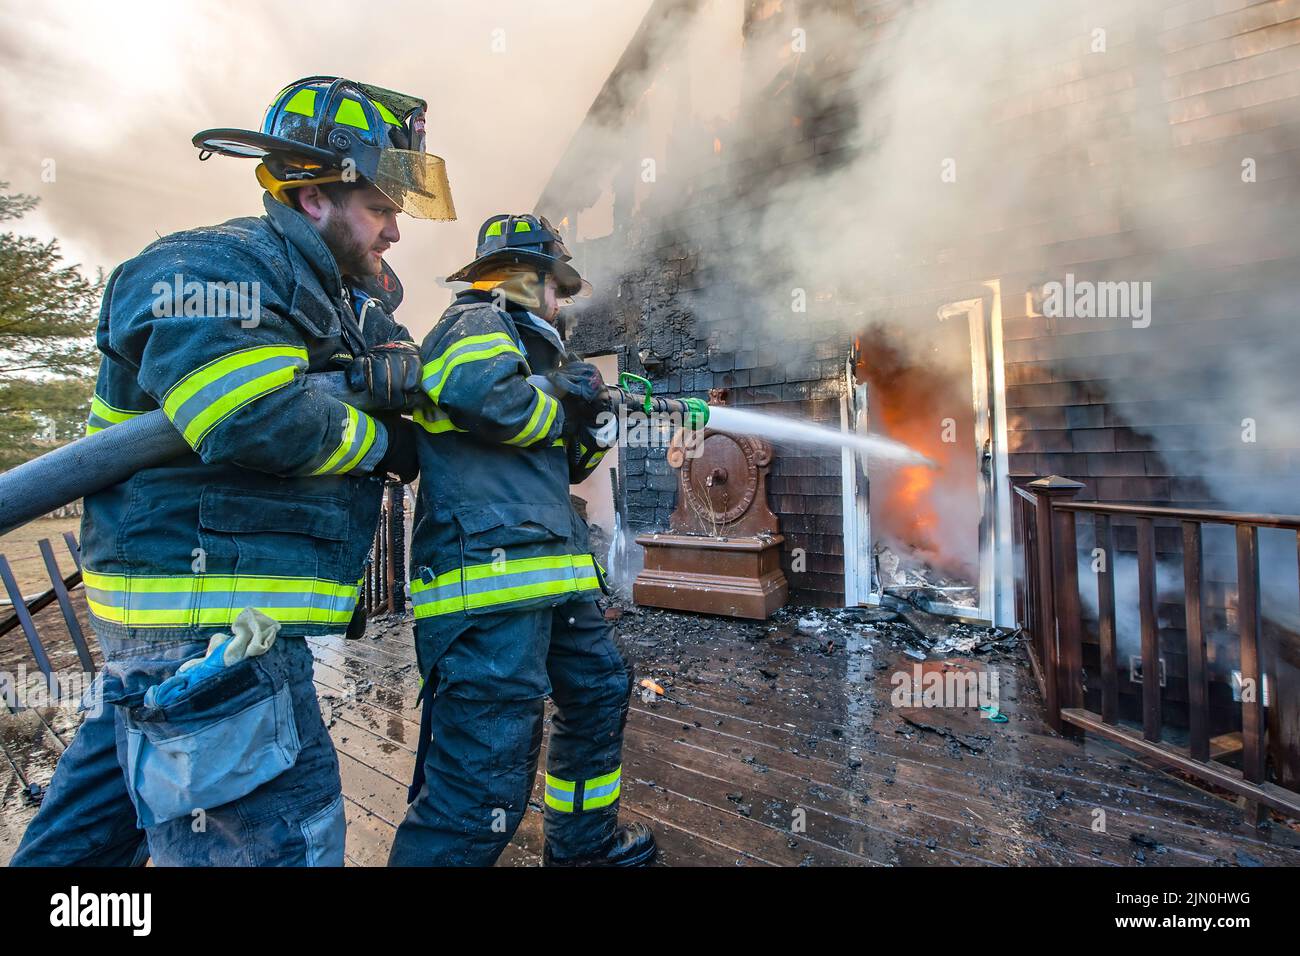 A team of two firefighters works to extinguish the fire as shortly before 6:00 a.m. on Saturday, March 8th, 2014 the Bridgehampton Fire Department was Stock Photo